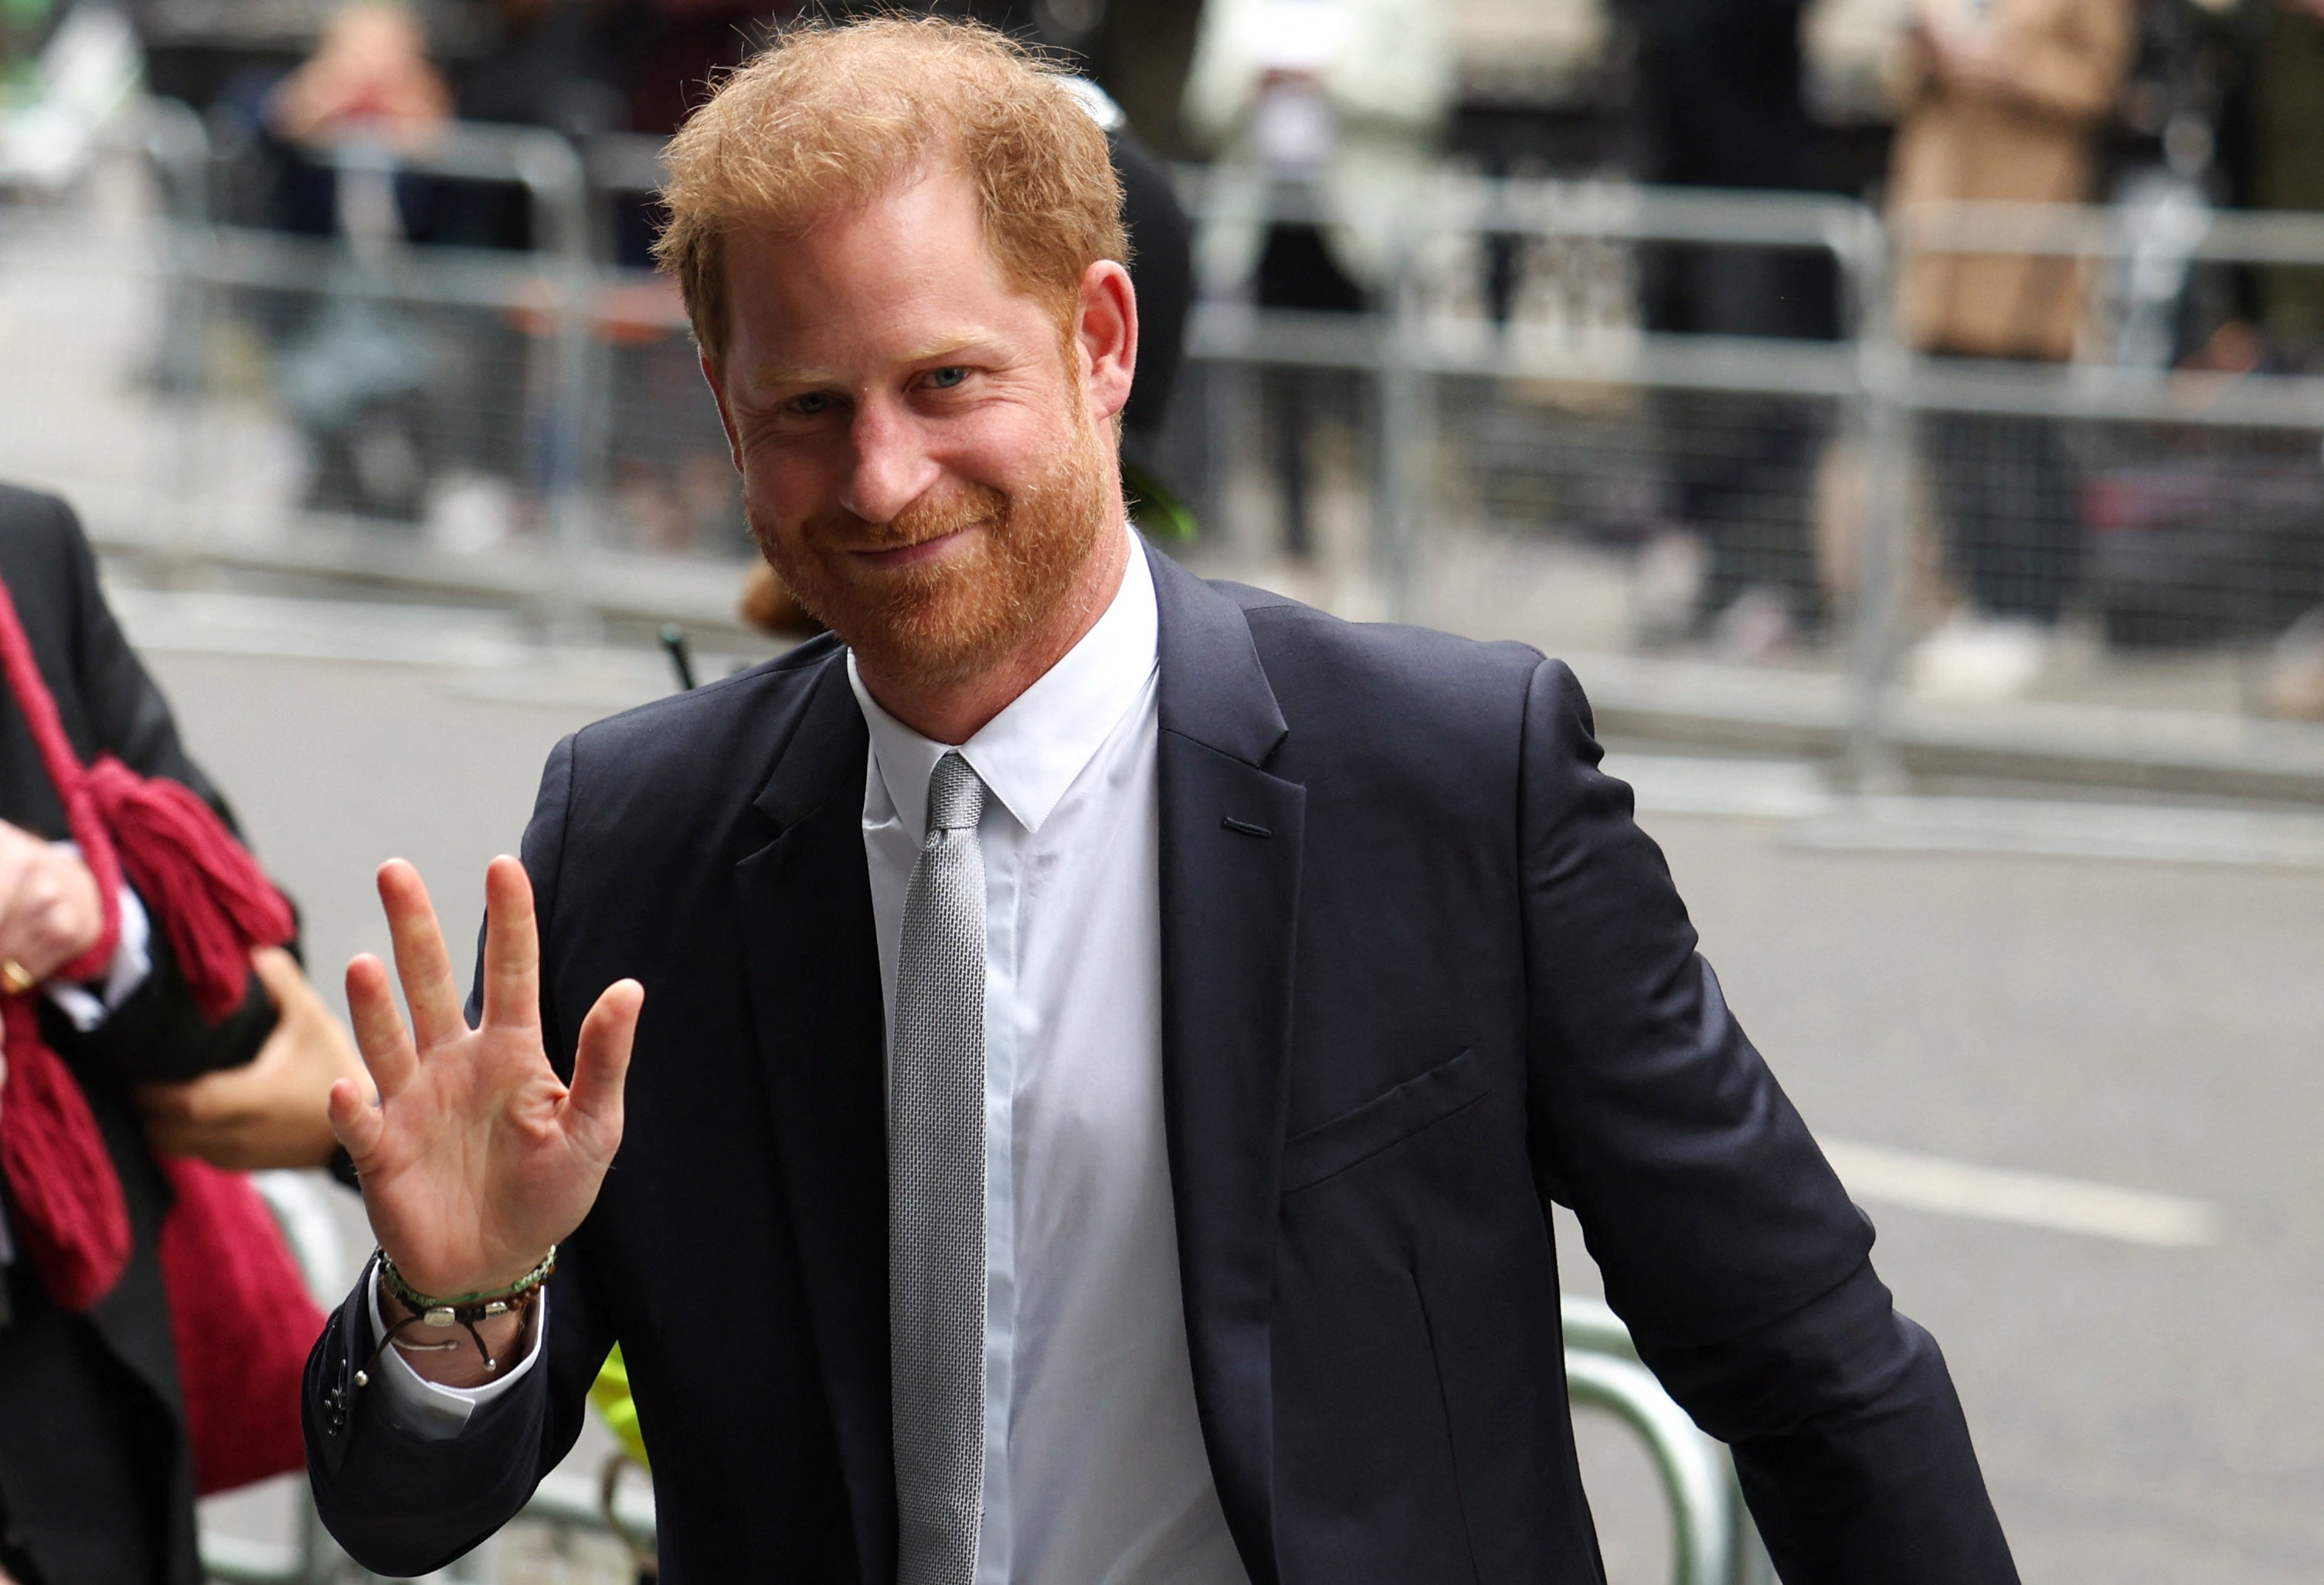 Prince Harry recently celebrated the 10th anniversary of the games, which he founded in 2014.